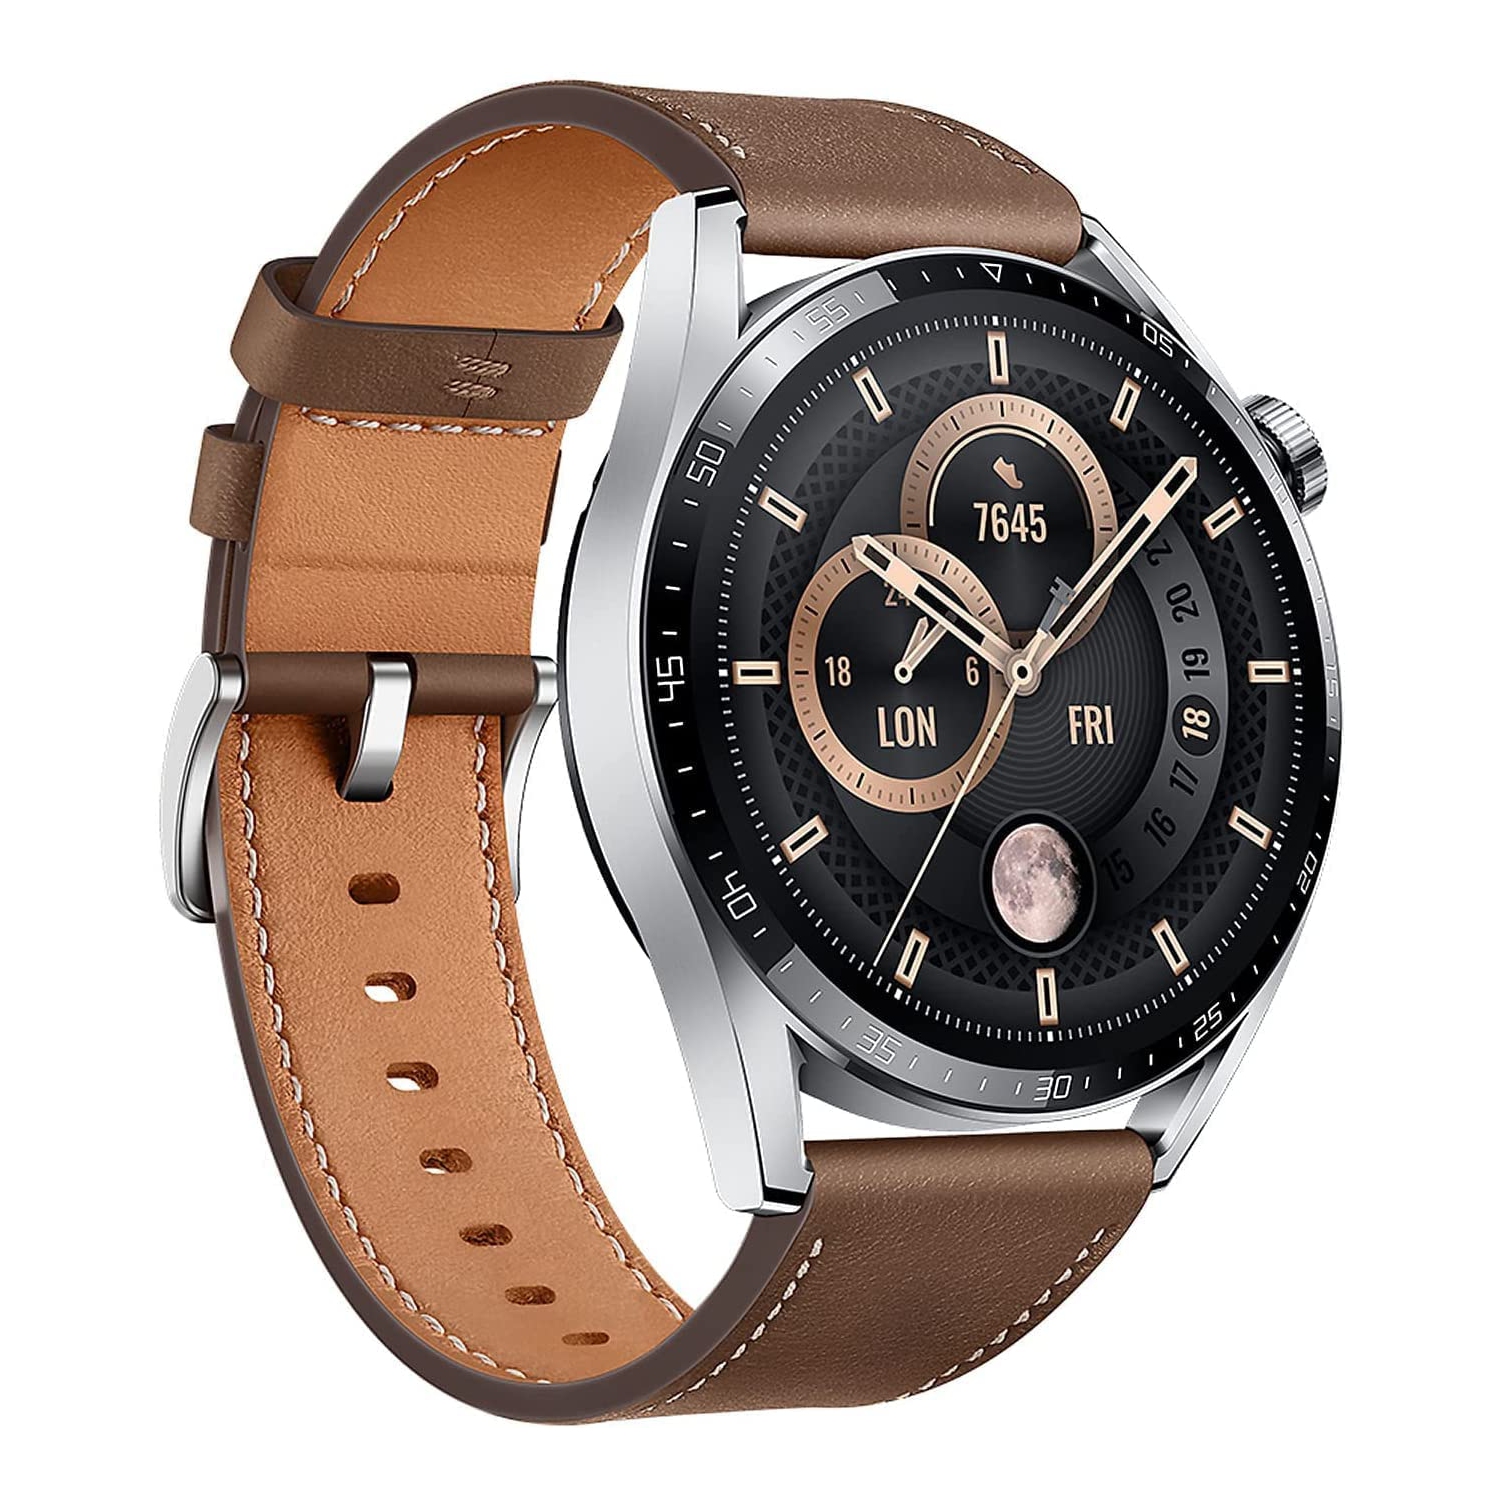 HUAWEI Watch GT 3 Smartwatch - Durable Battery, All-Day SpO2 & Heart Rate Monitoring, 100+ Workout Modes, Bluetooth Calling, 46mm, Brown _International Model_ Open Box